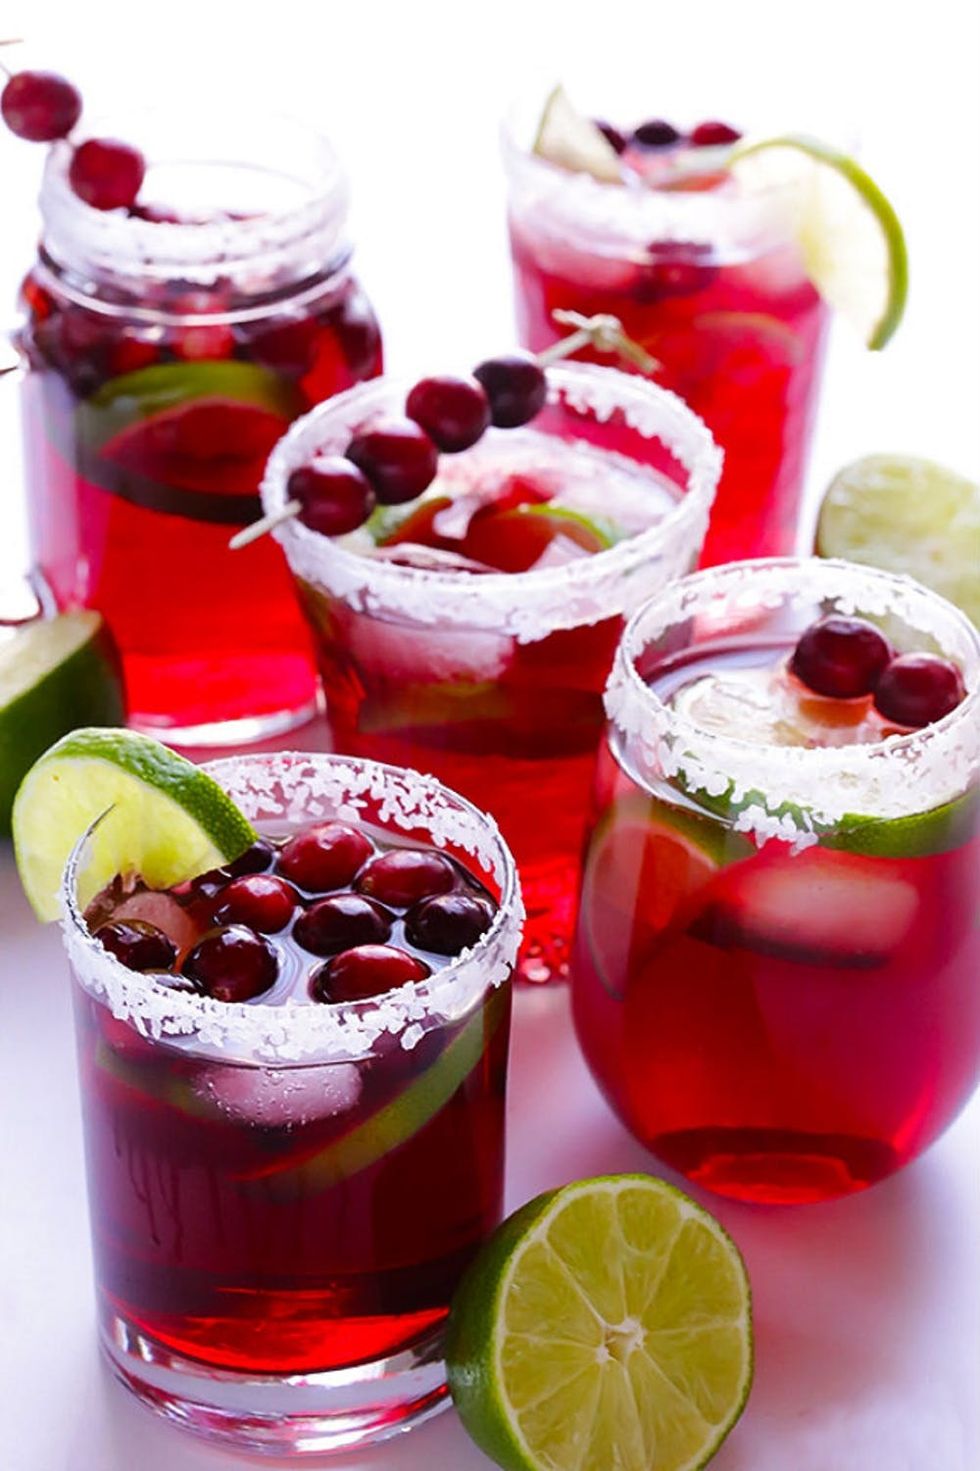 Margarita Drink with Cranberry Juice